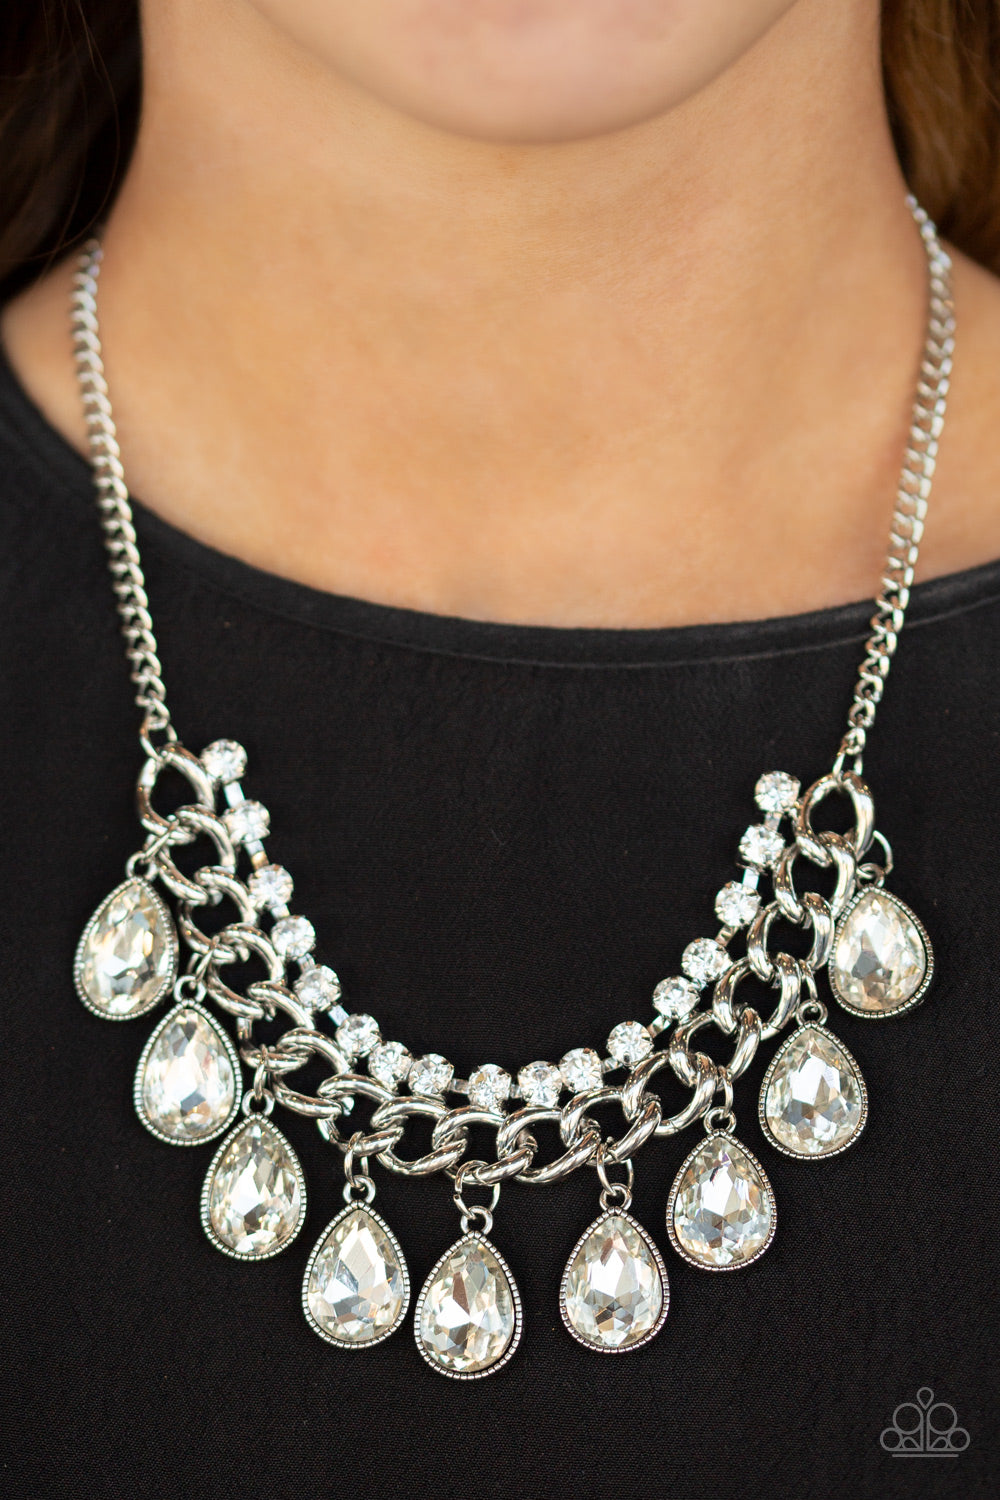 All Toget-Heir Now White Rhinestone Necklace Paparazzi Accessories